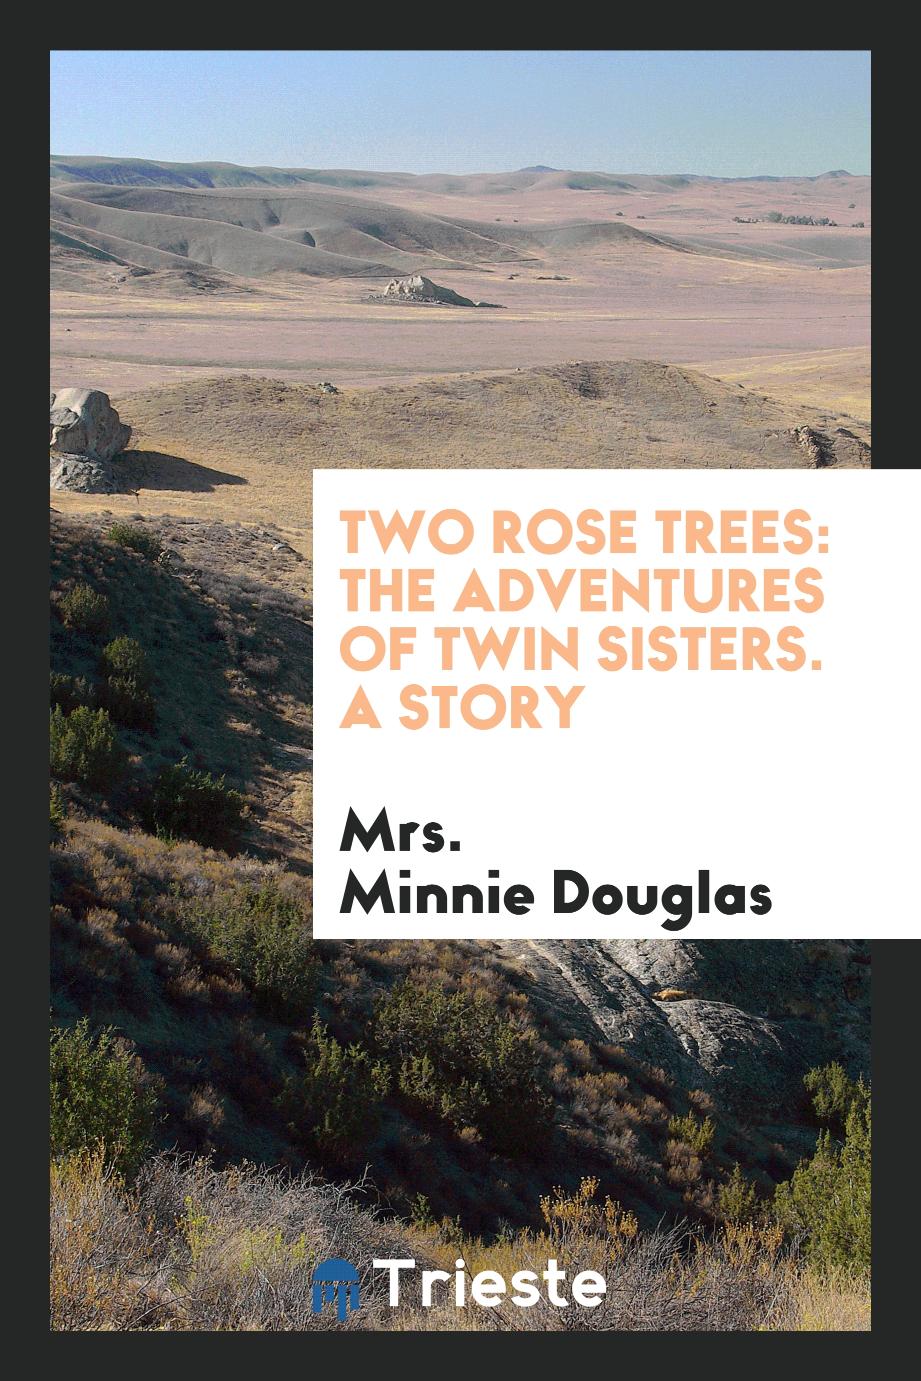 Two Rose Trees: The Adventures of Twin Sisters. A Story